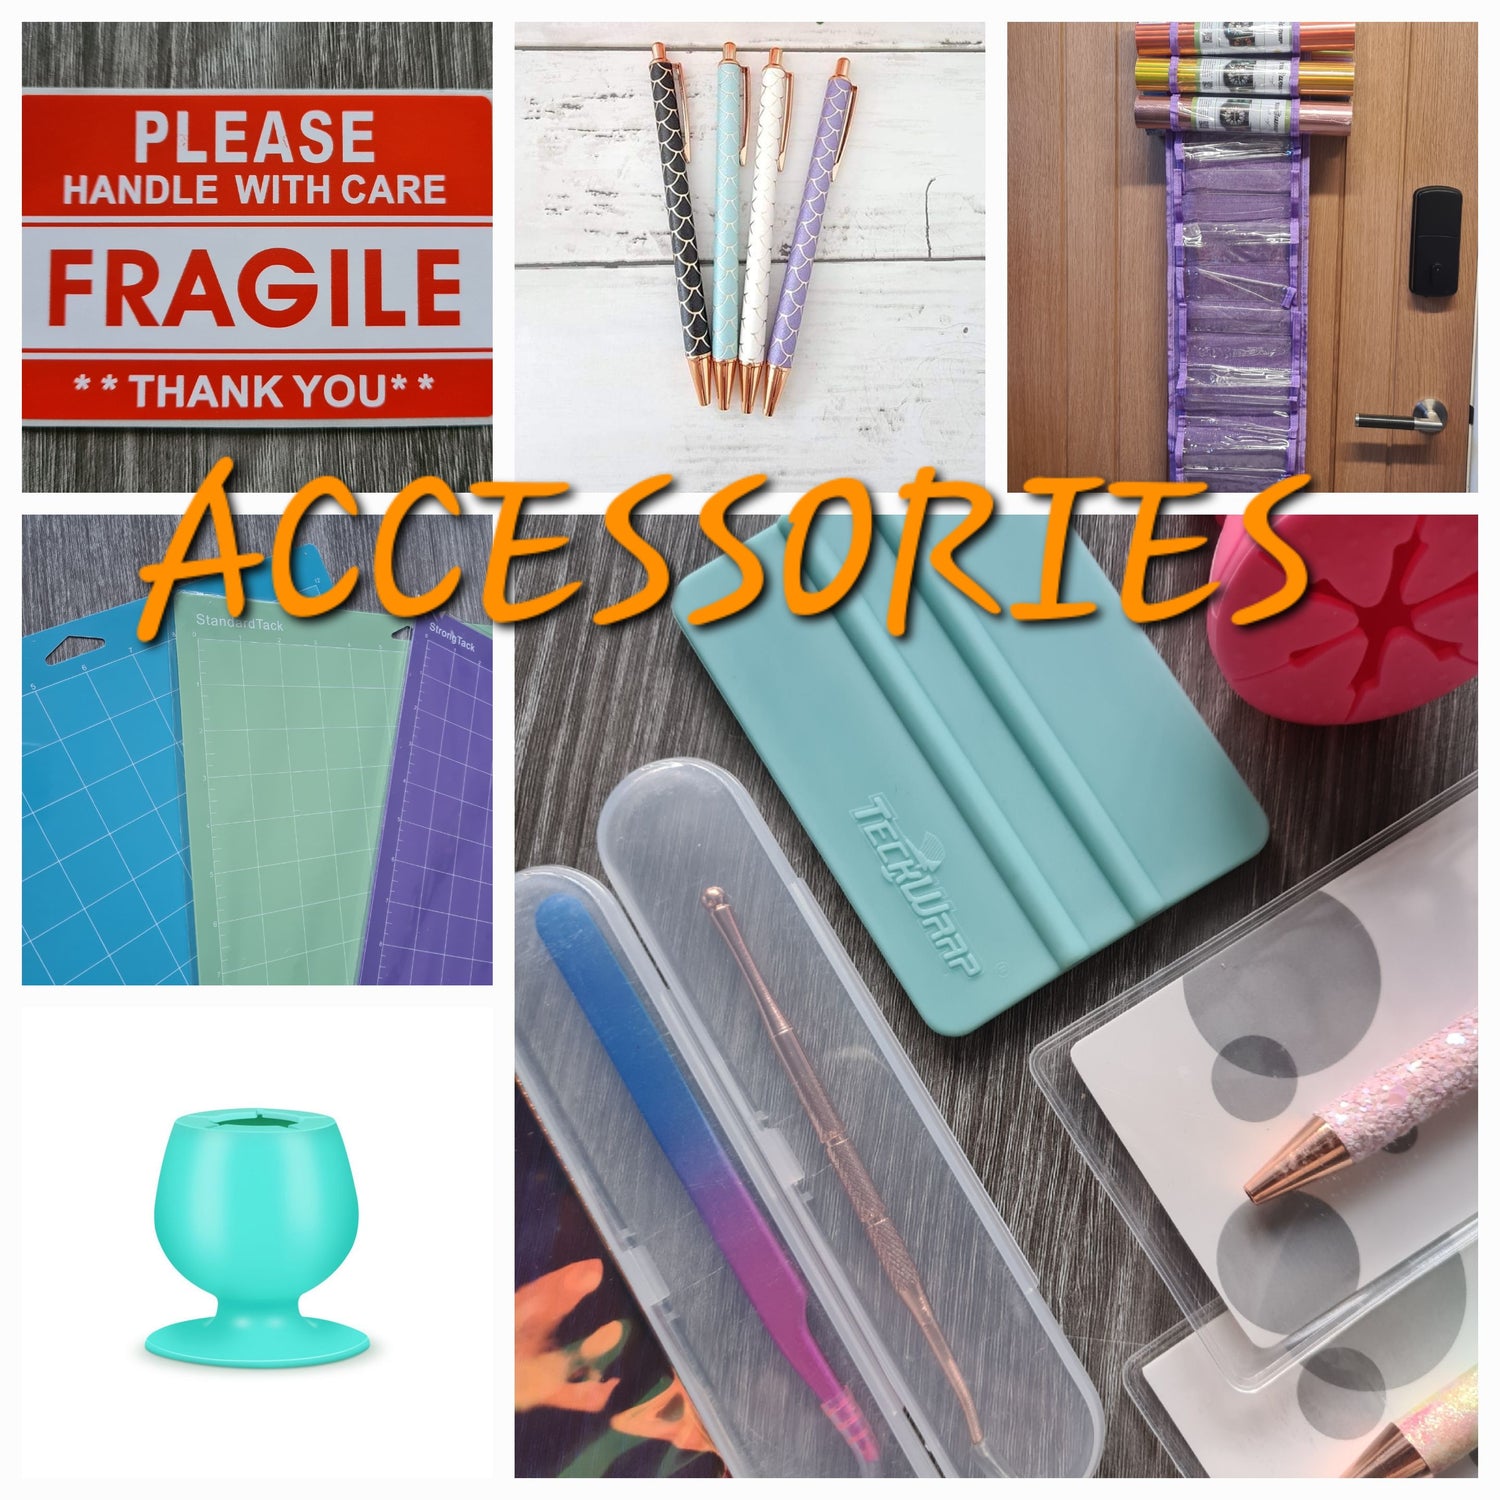 SALE .....ACCESSORIES TeckwrapCraft & OTHER TOOLS